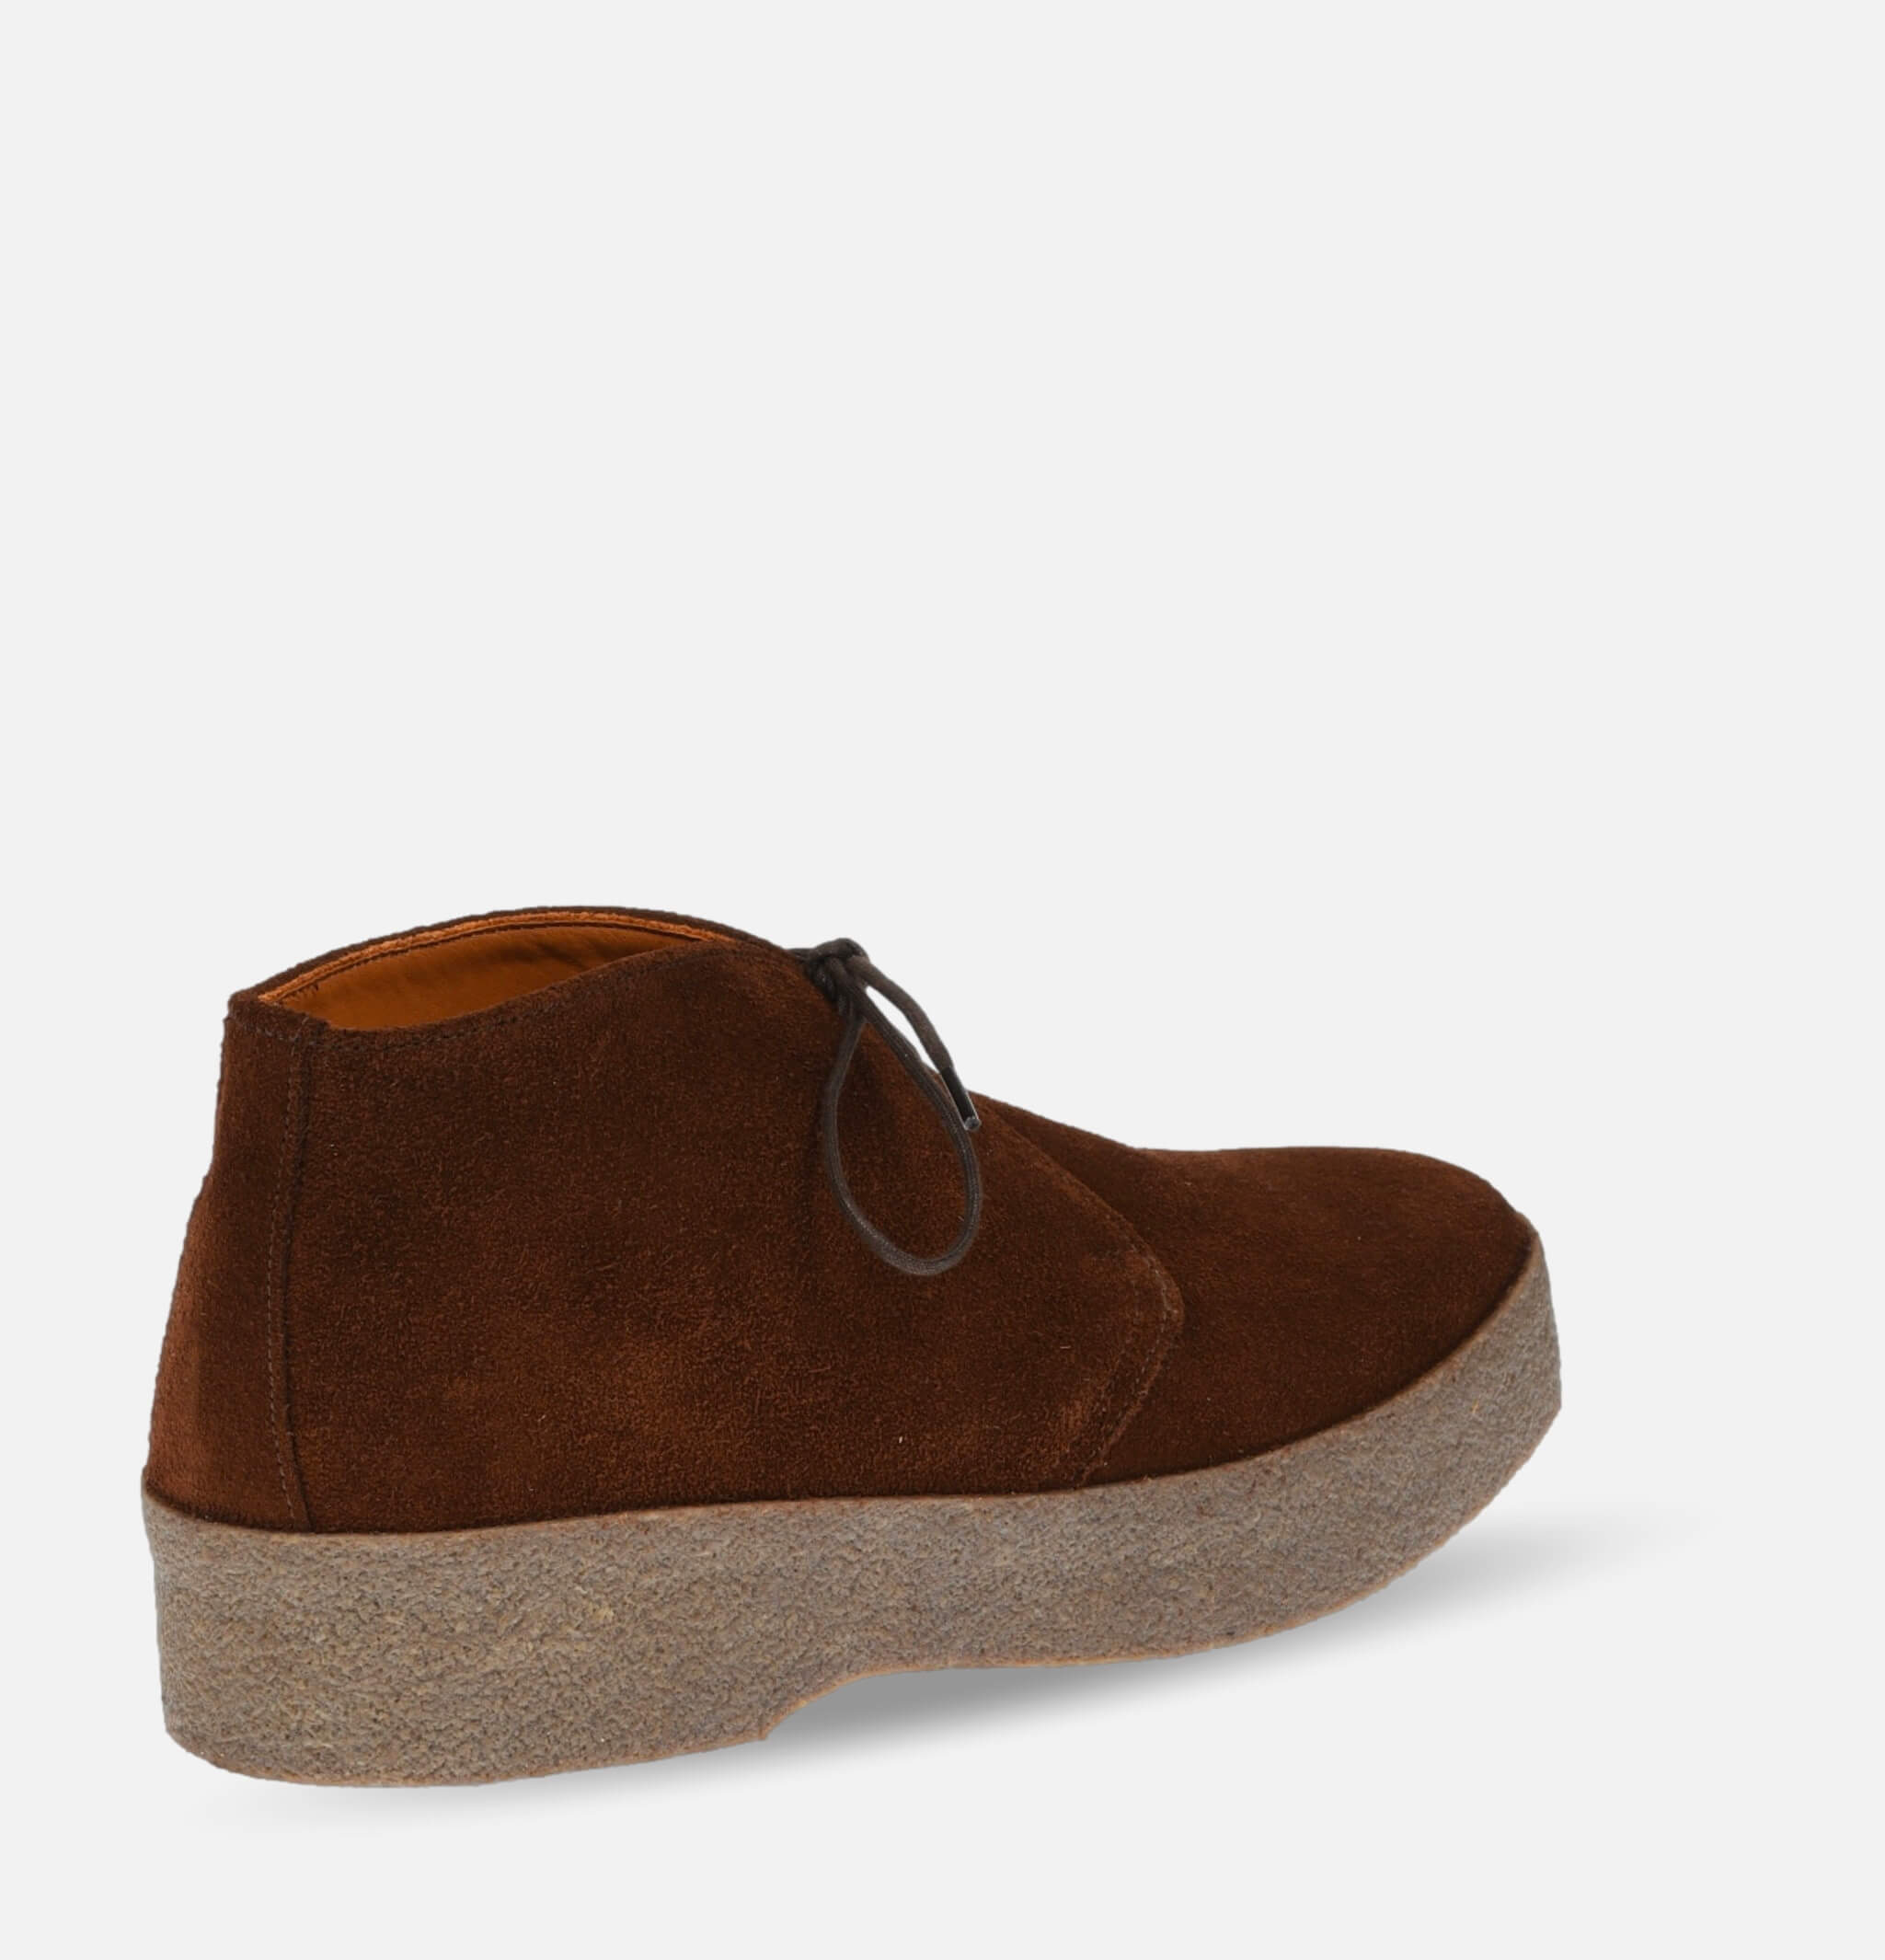 Playboy Shoes Scandinavia - The Original Playboy Chukka in cognac suede.  Steve McQueen's favorite both on and off screen back in the days. The King  of Cool will always be a defining